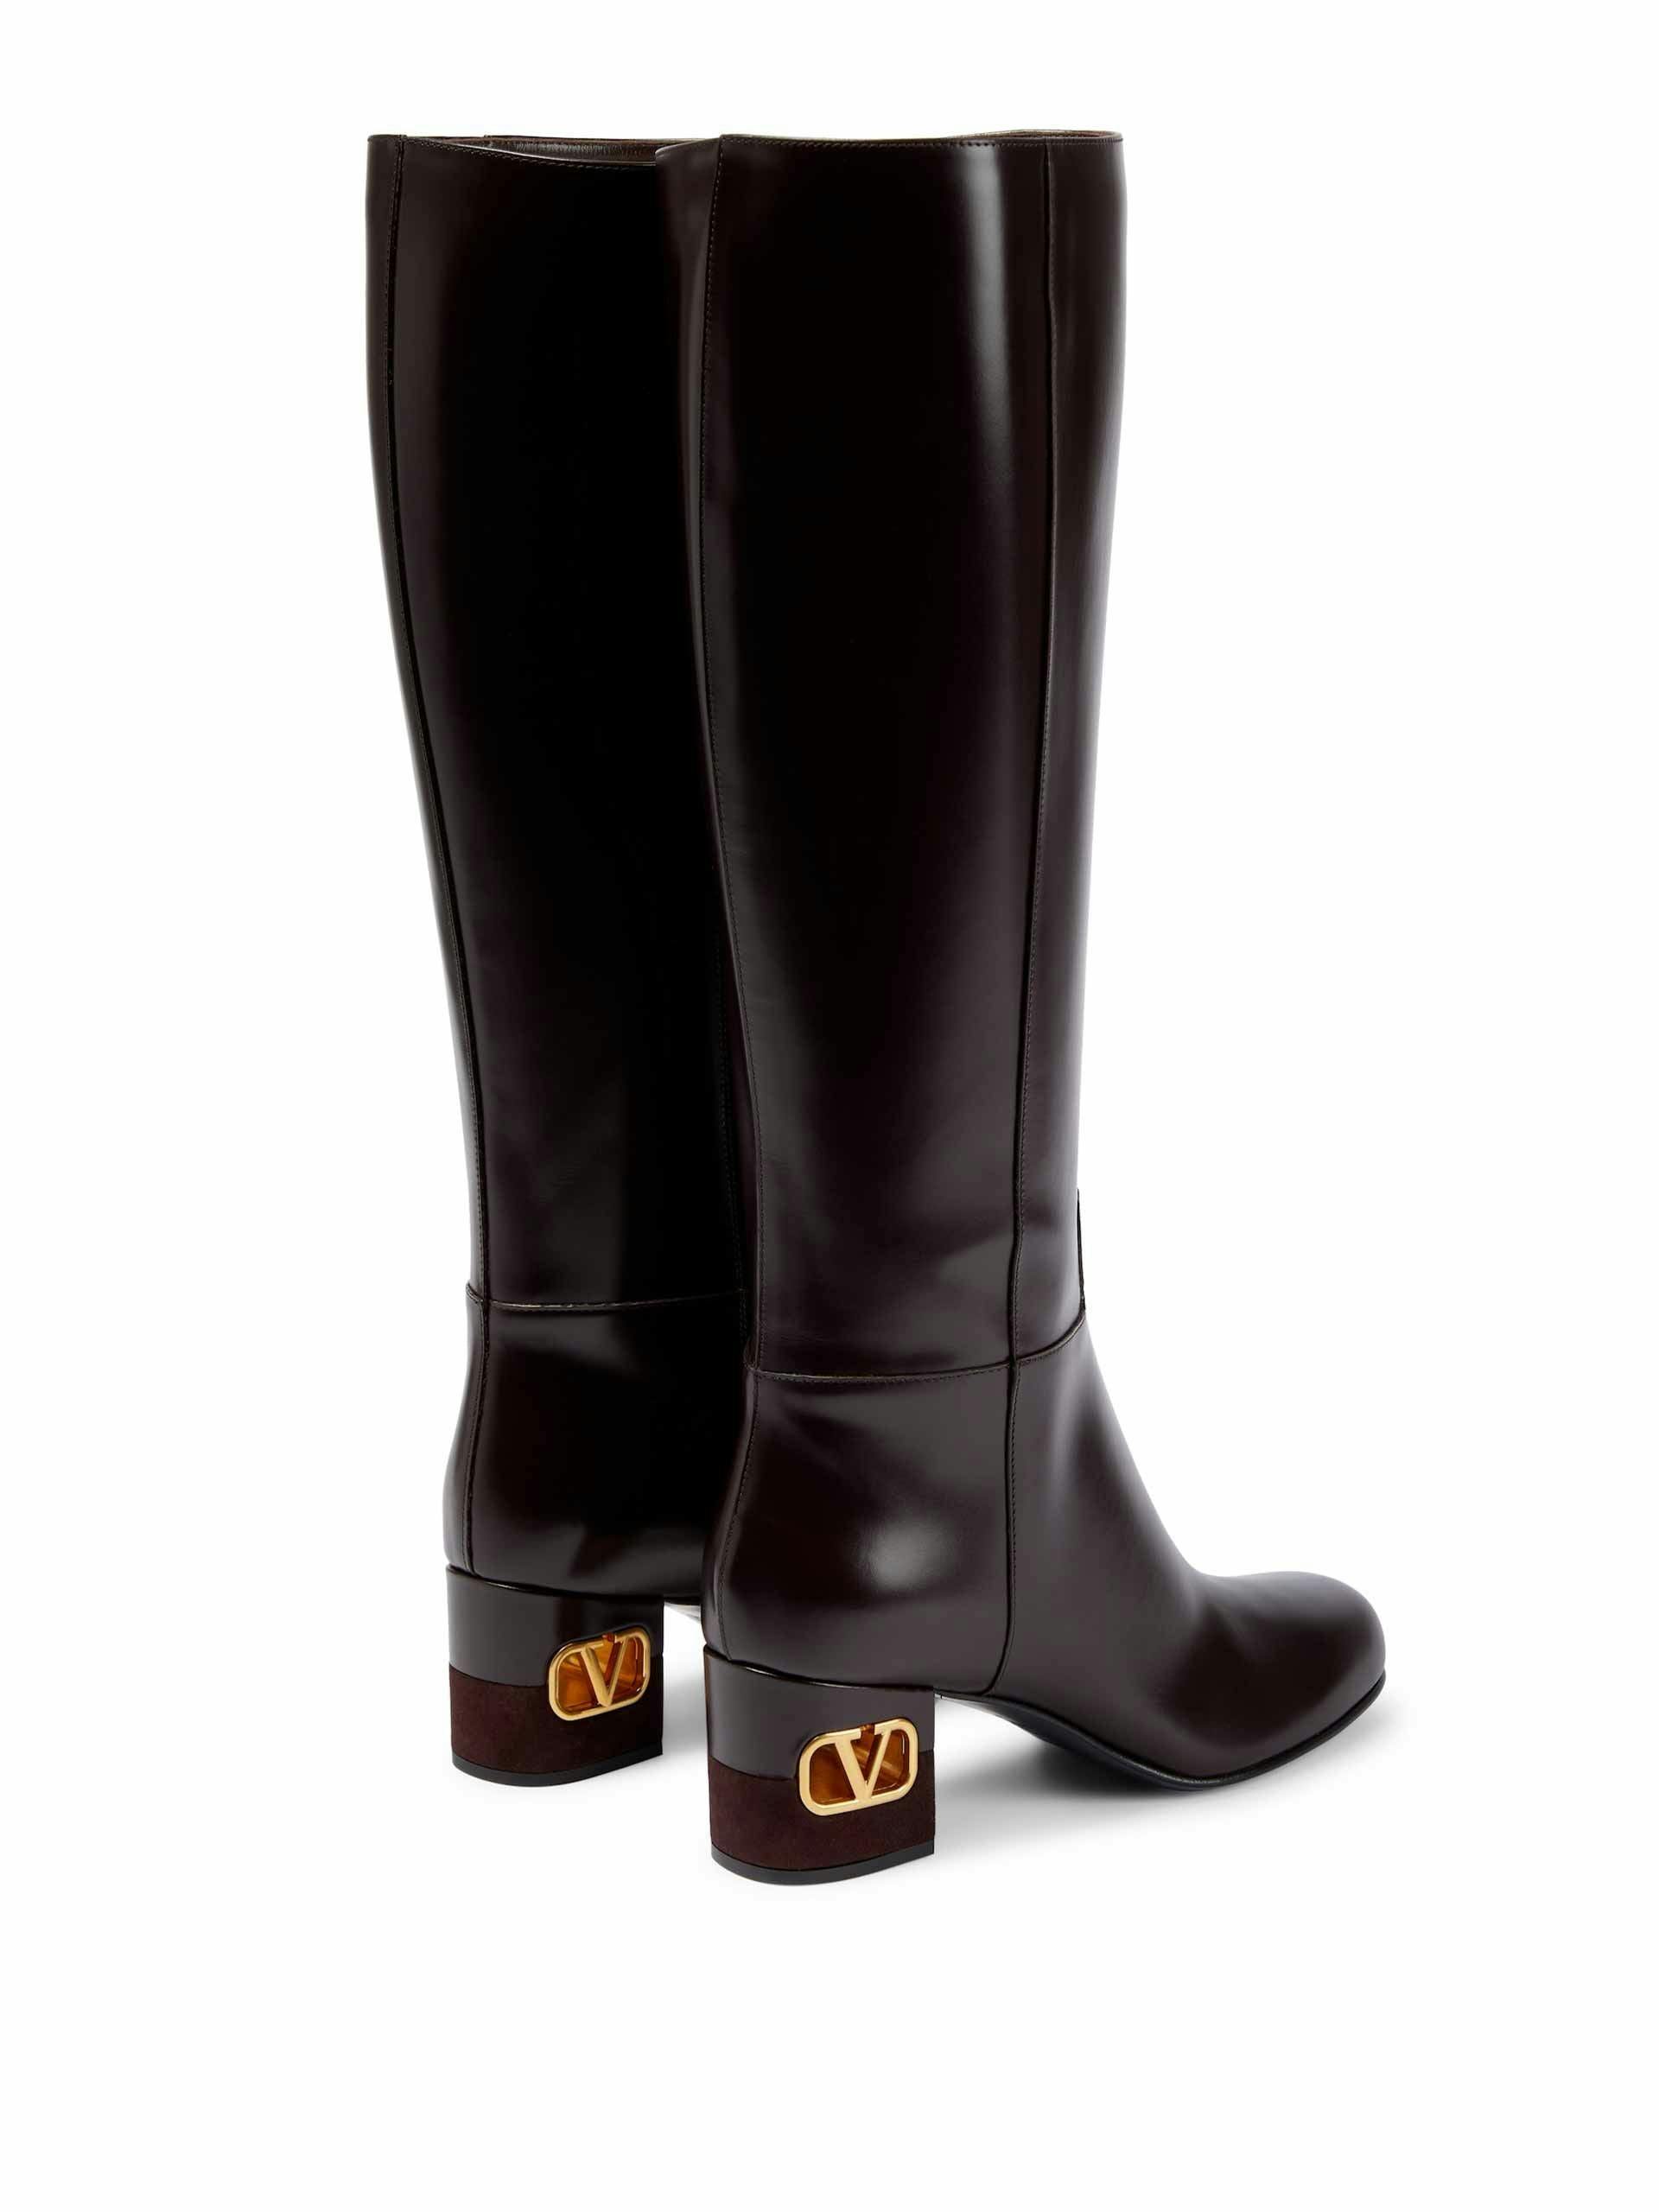 Heritage knee-high leather boots